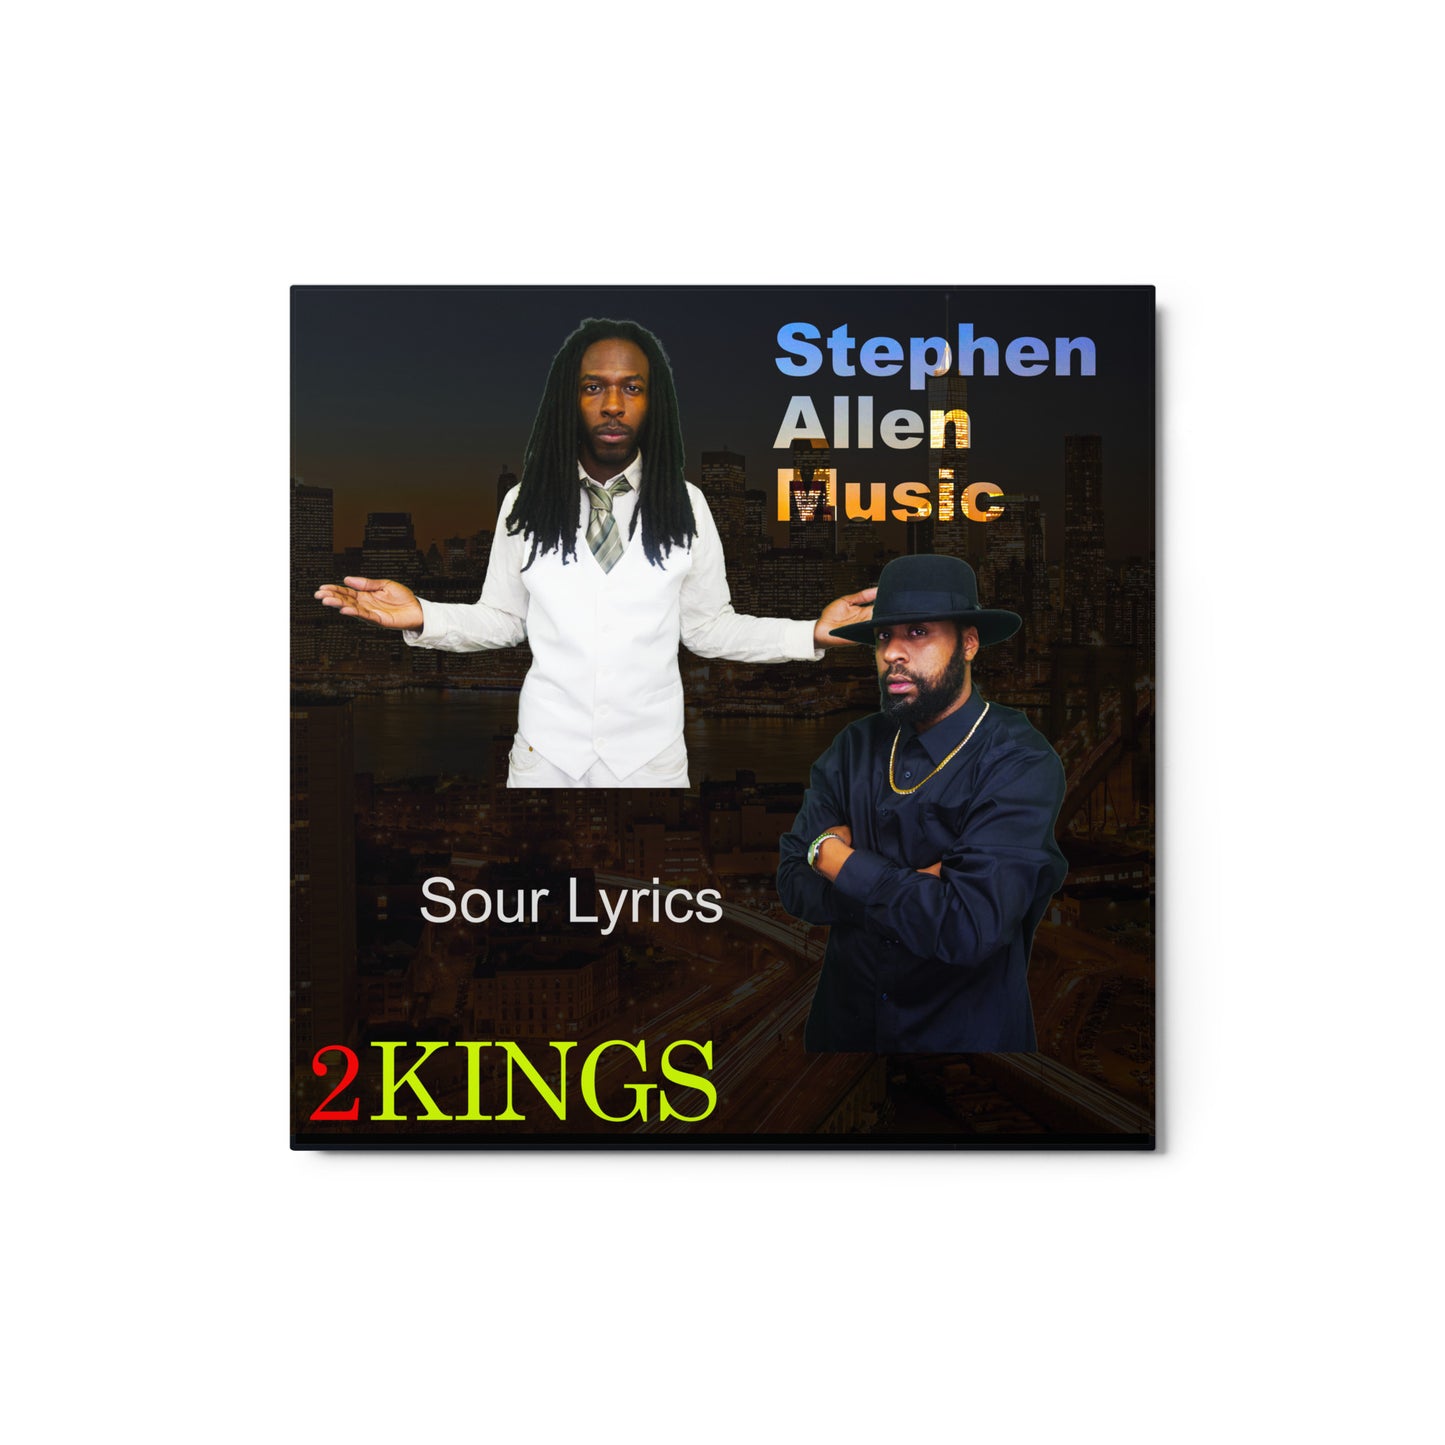 Stephen Allen Music and Sour Lyrics 2 Kings Cover Glossy Metal Print 12 x 12